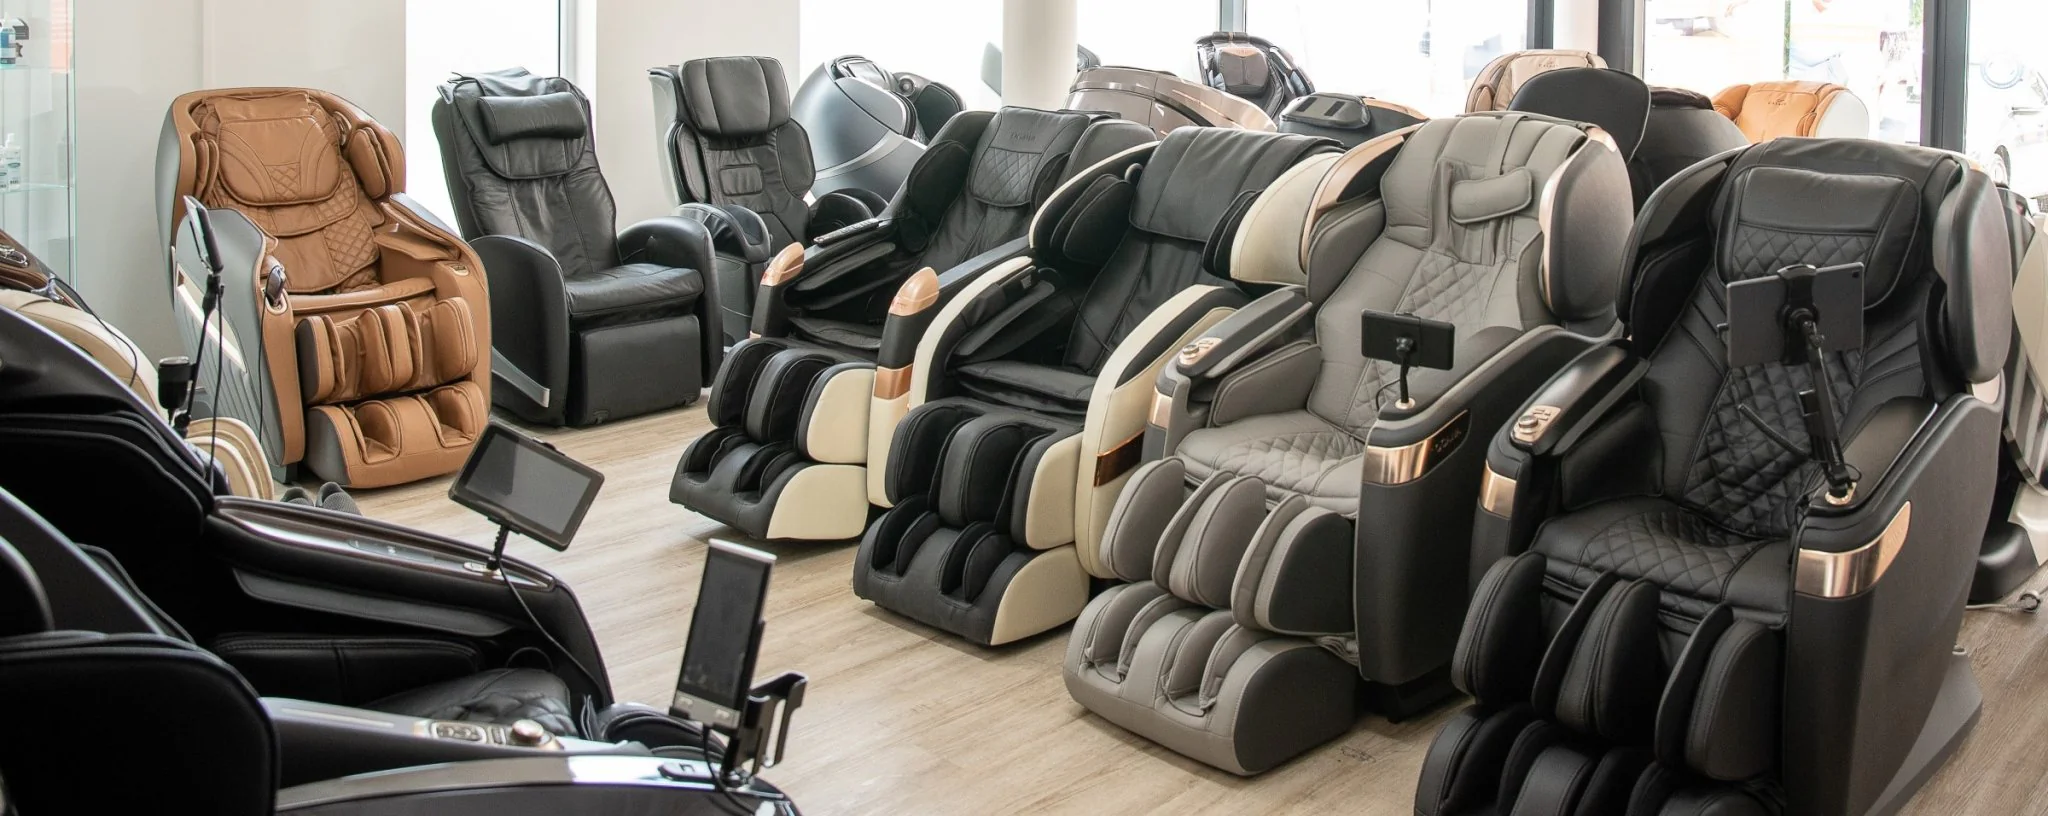 Germany and Europe's largest massage chair exhibition